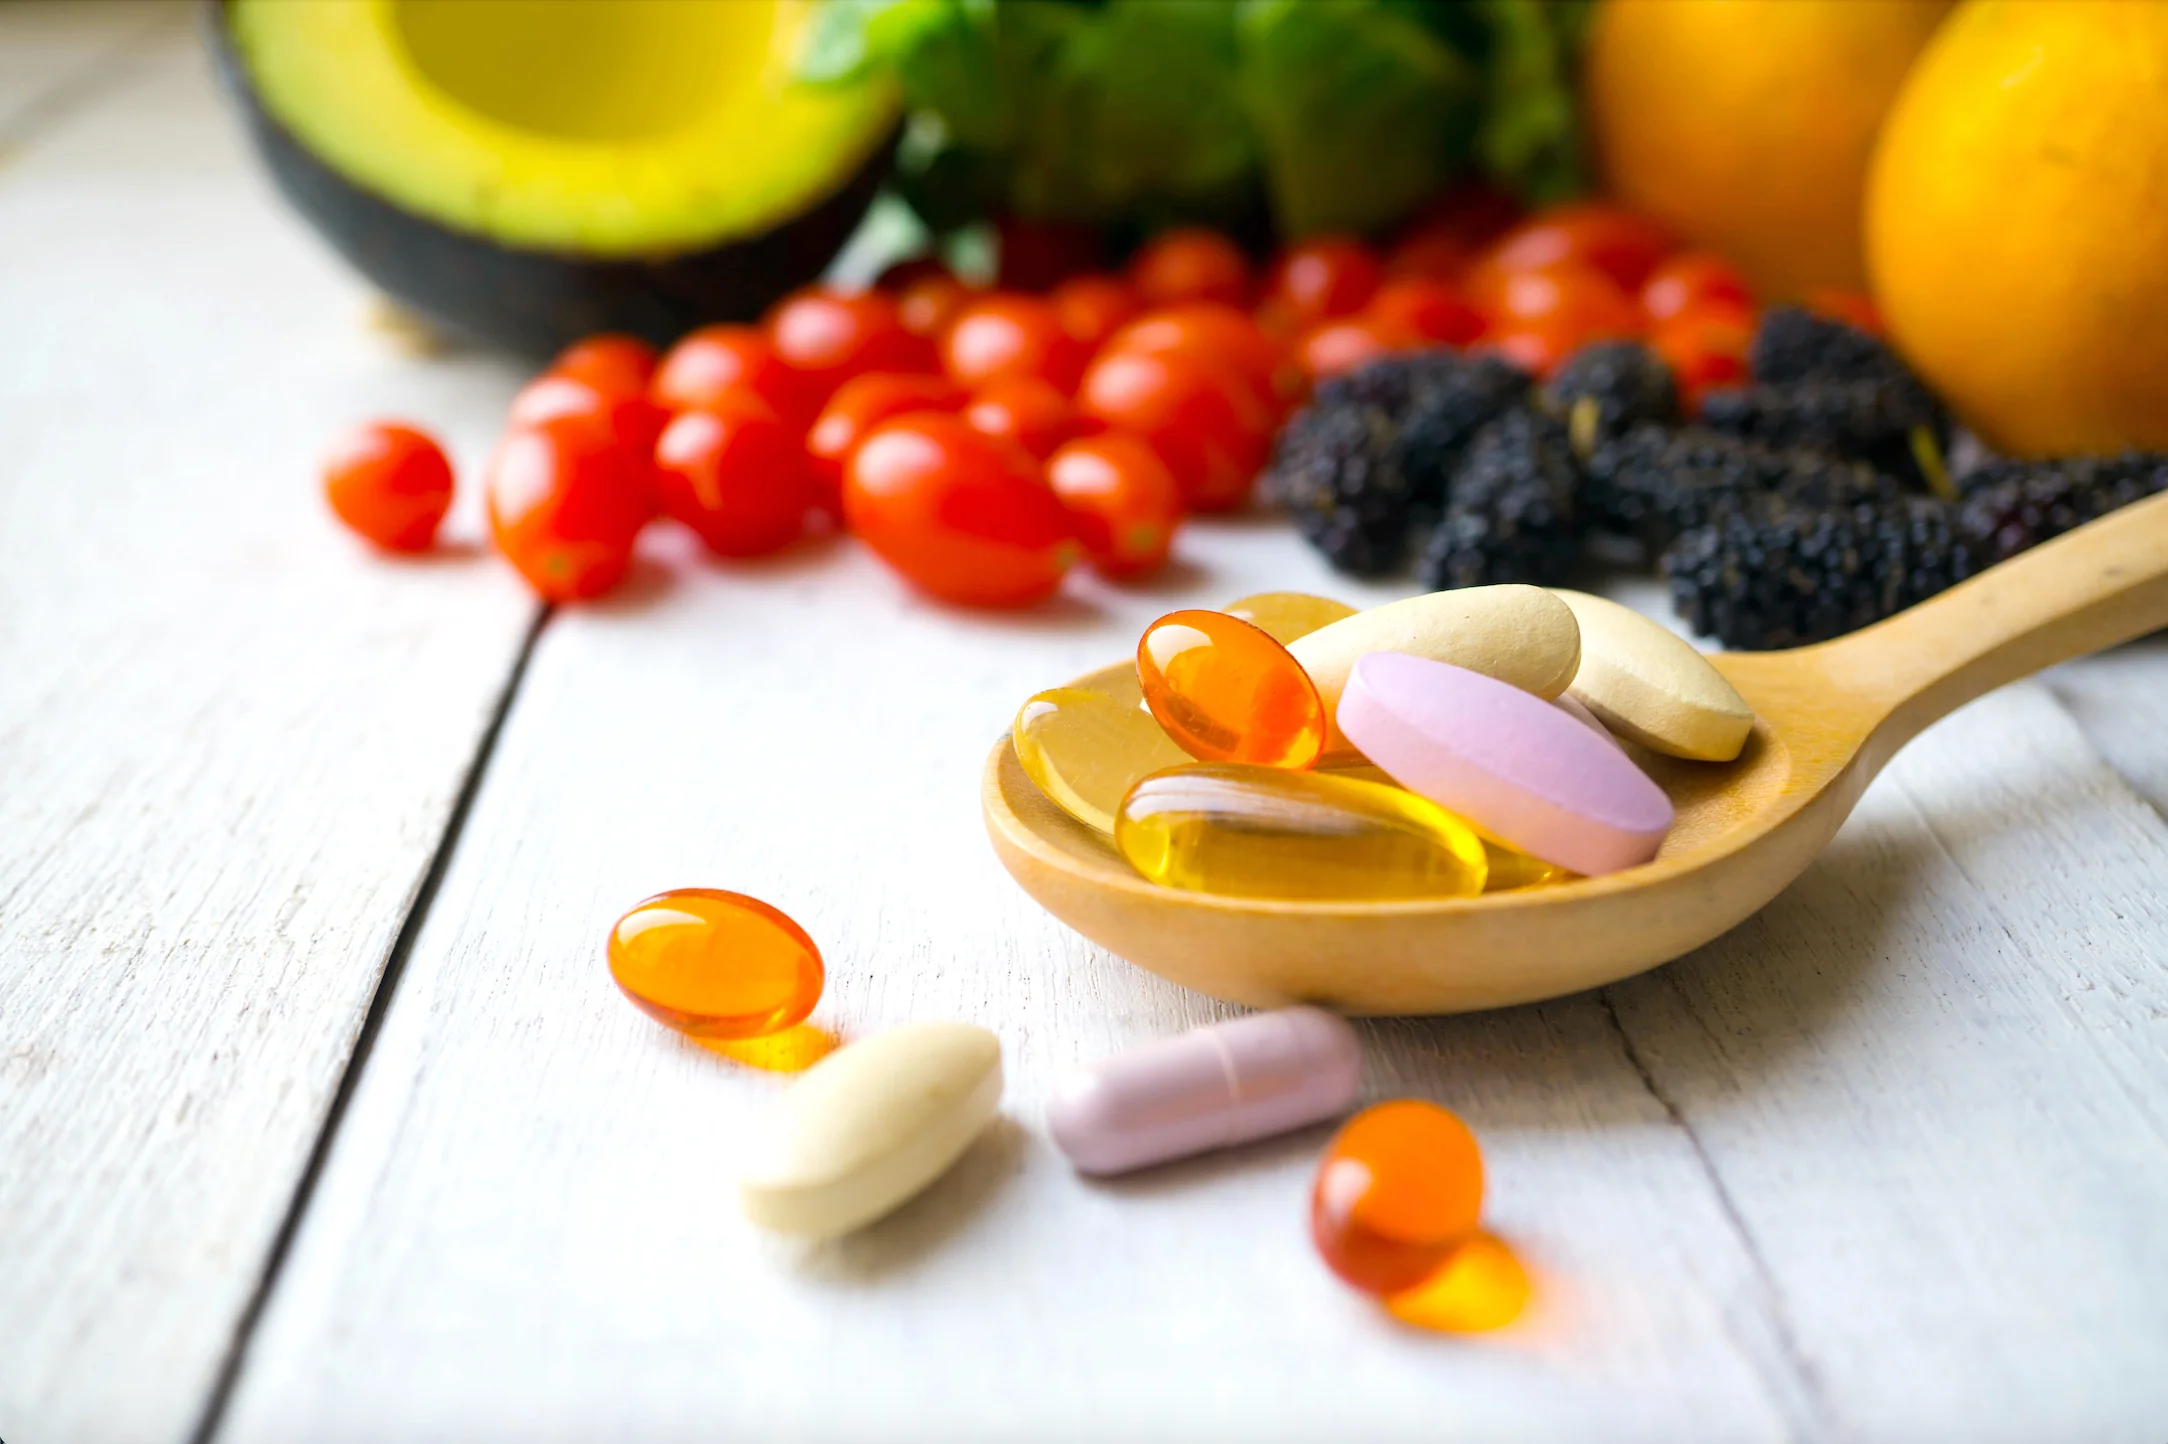 Why Should You Purchase Organic Wellness Supplements Online?